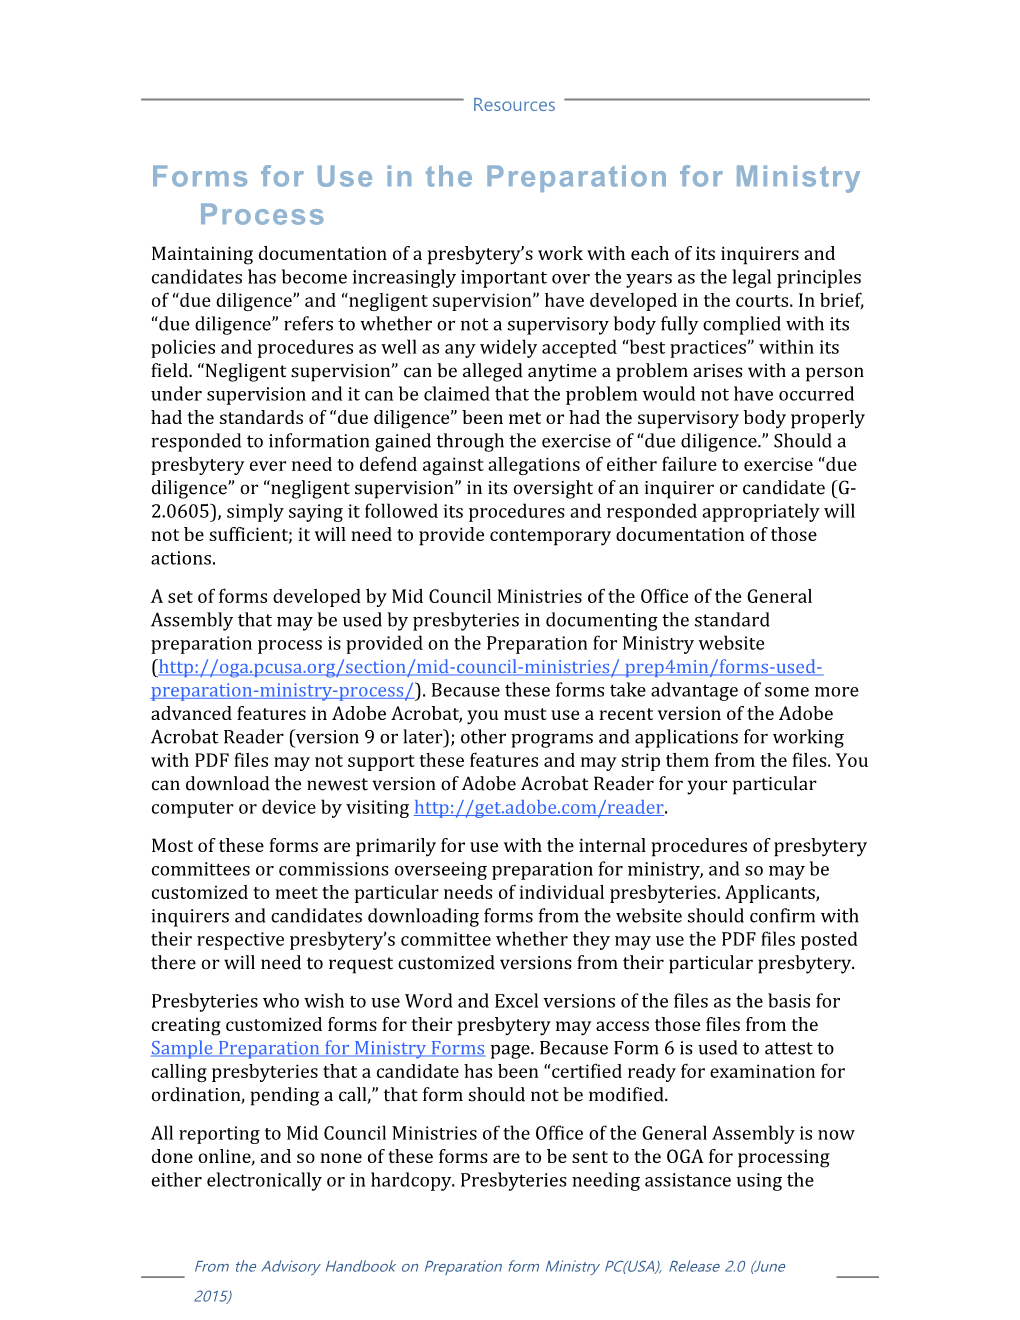 Forms for Use in the Preparation for Ministry Process